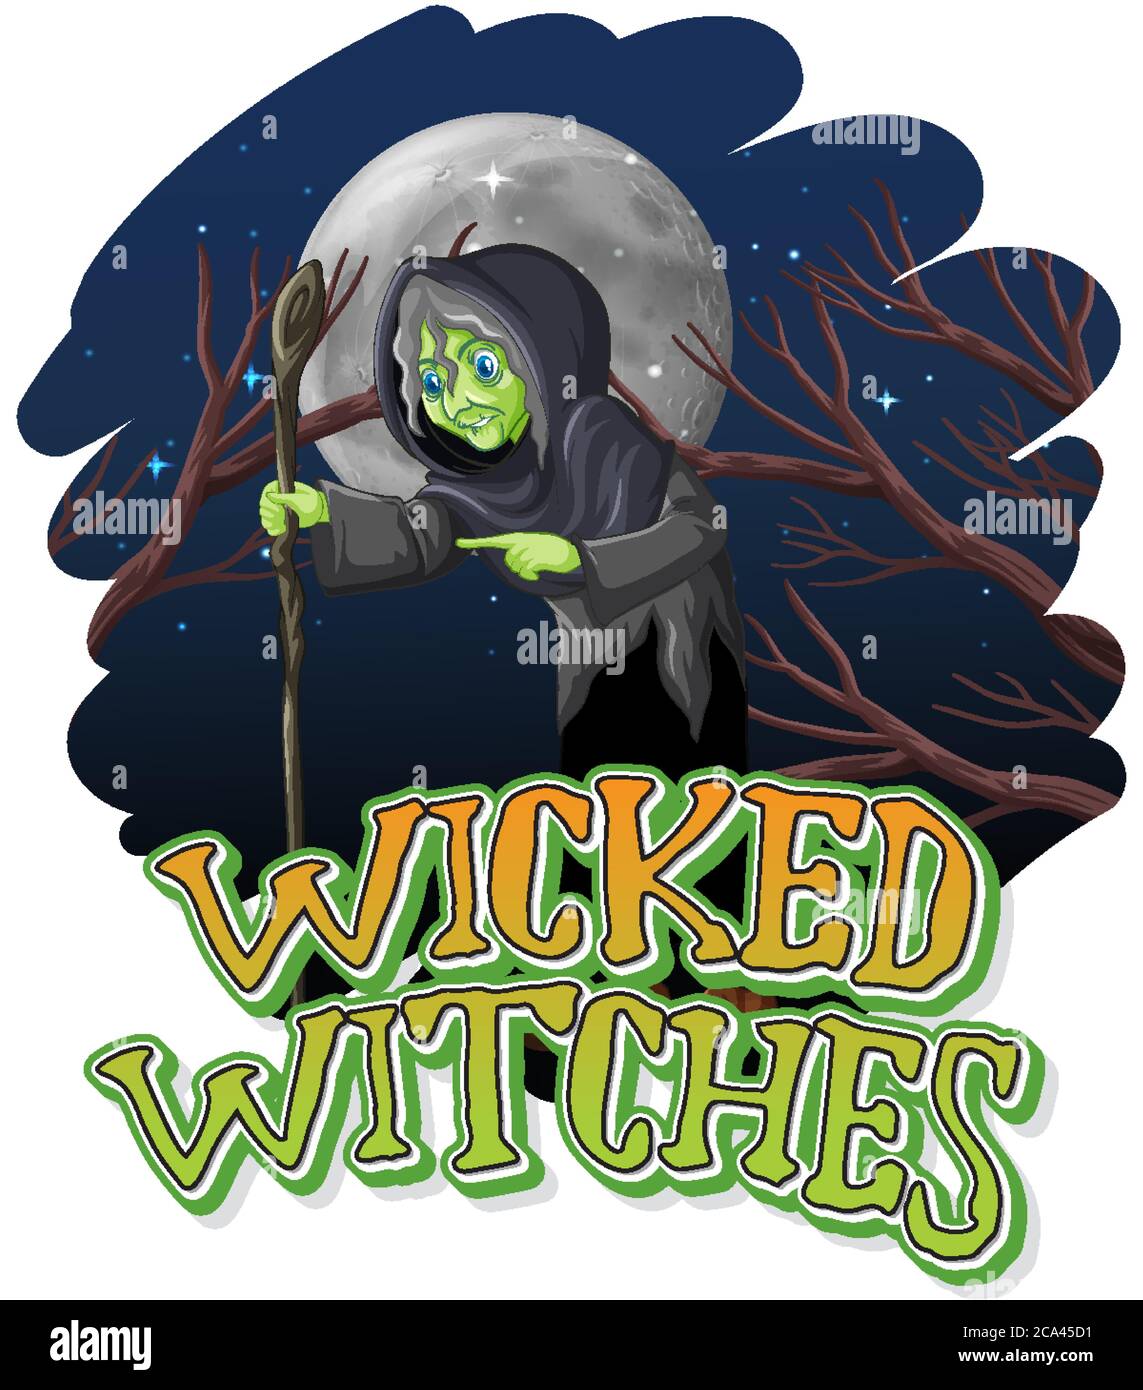 Wicked witches on night background illustration Stock Vector